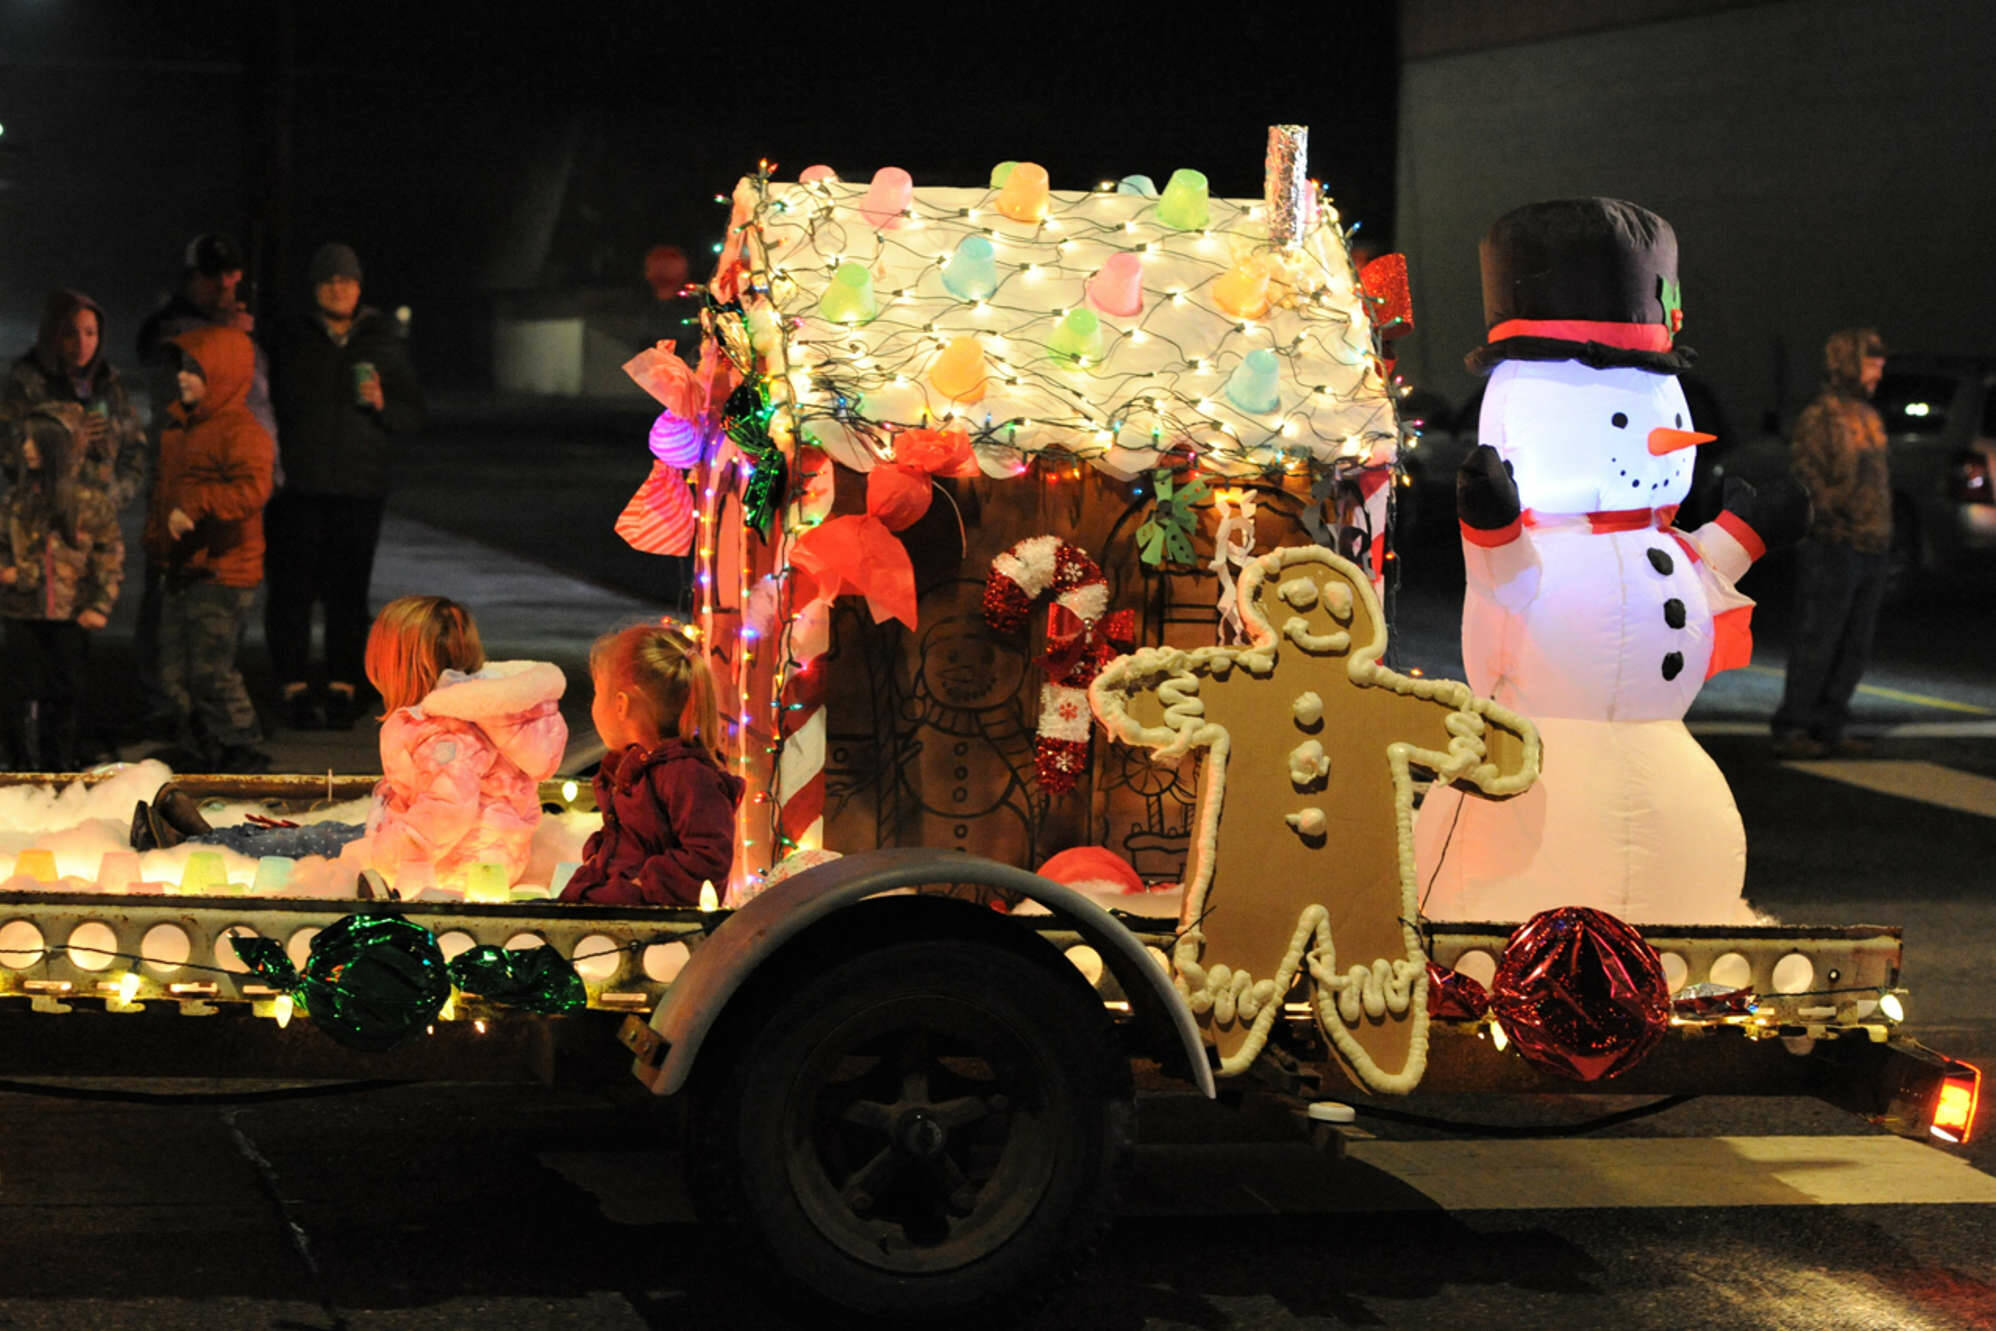 Kenzie Bechtold and Emery Fletcher ride in a gingerbread float created by Melissa Hitzfeld, Sarah Fletcher and Erica Bechtold during the Forks Twinkle Lights Parade on Saturday on Forks Avenue. (Lonnie Archibald/for Peninsula Daily News)